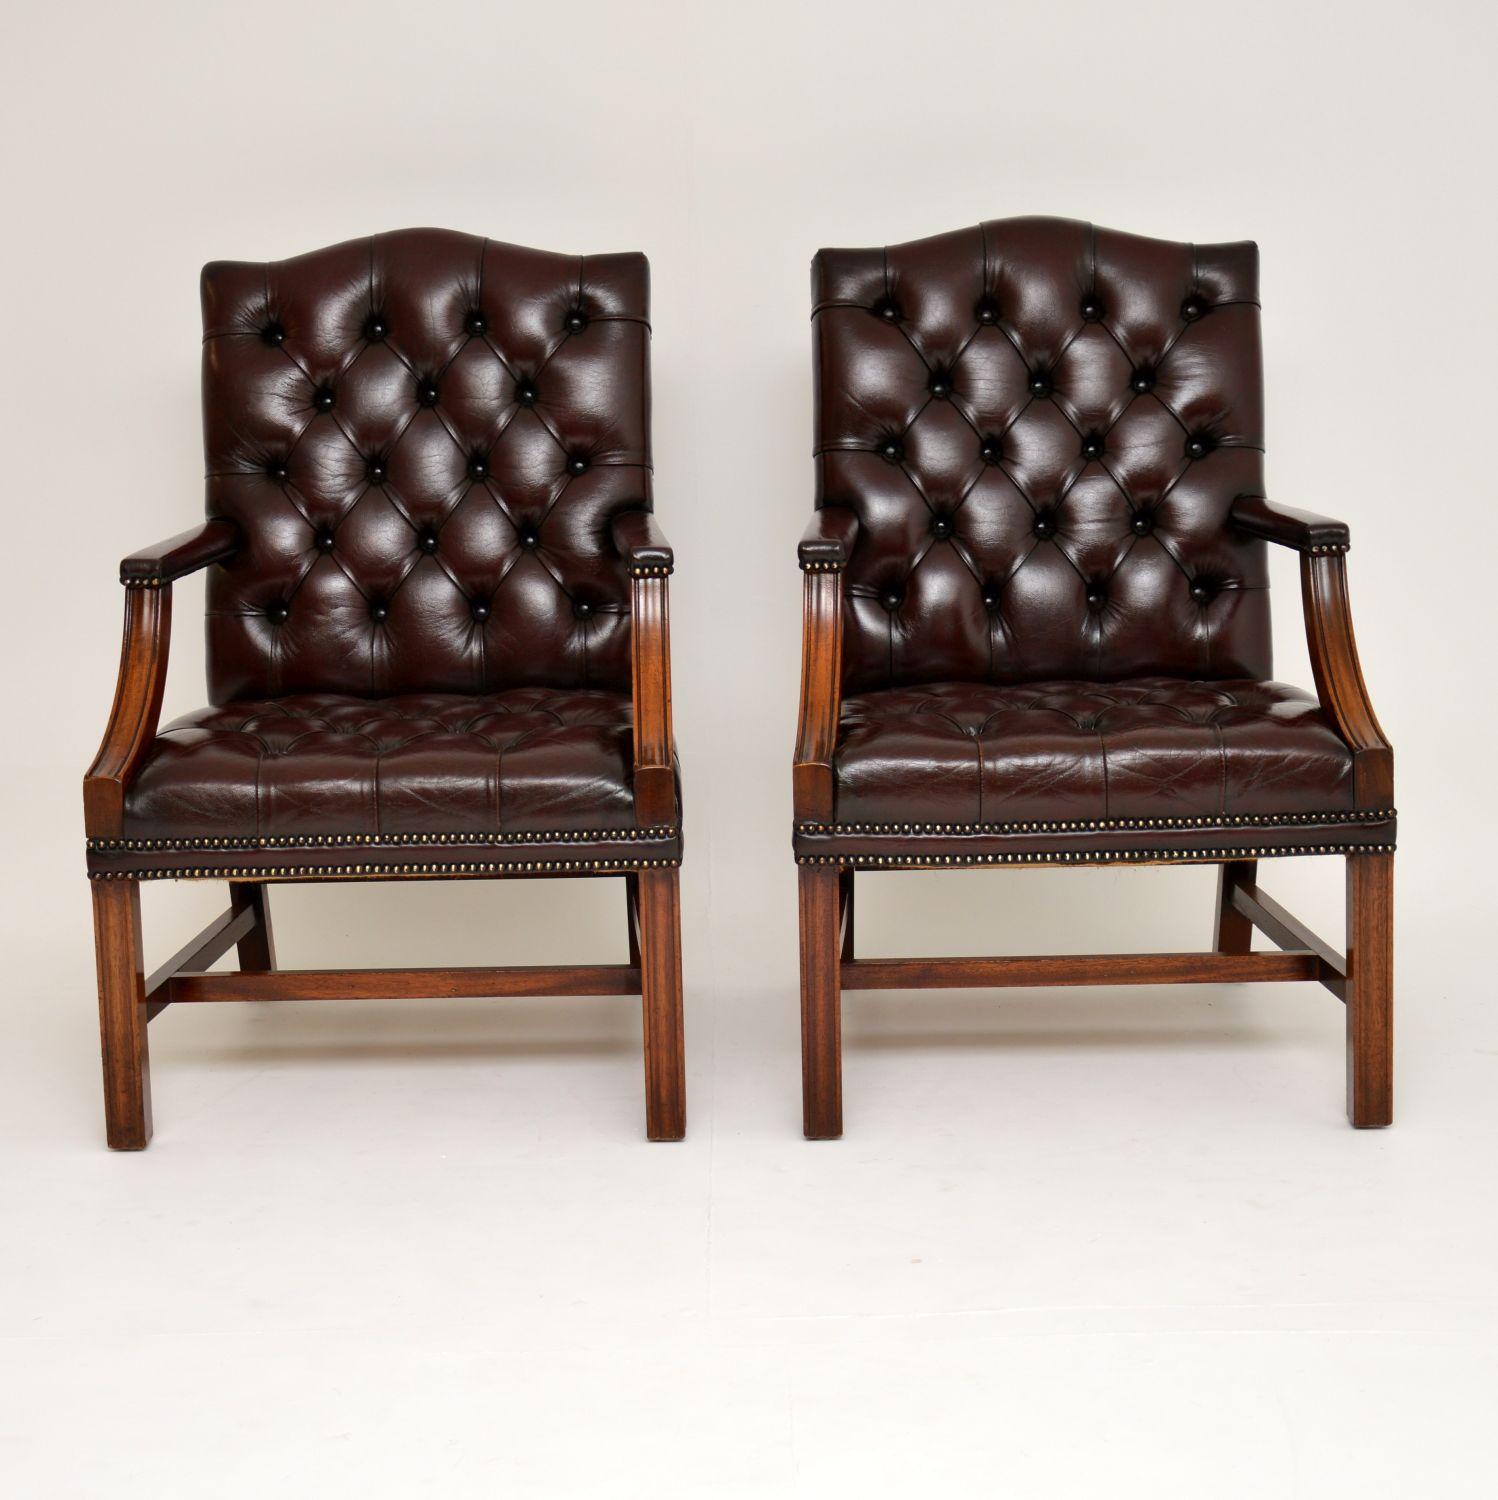 Pair of antique deep buttoned leather & mahogany Gainsborough armchairs in excellent original condition & dating from circa 1950s period.

The seats & backs are deep buttoned & the leather is hand tacked onto the frames. They also have padded